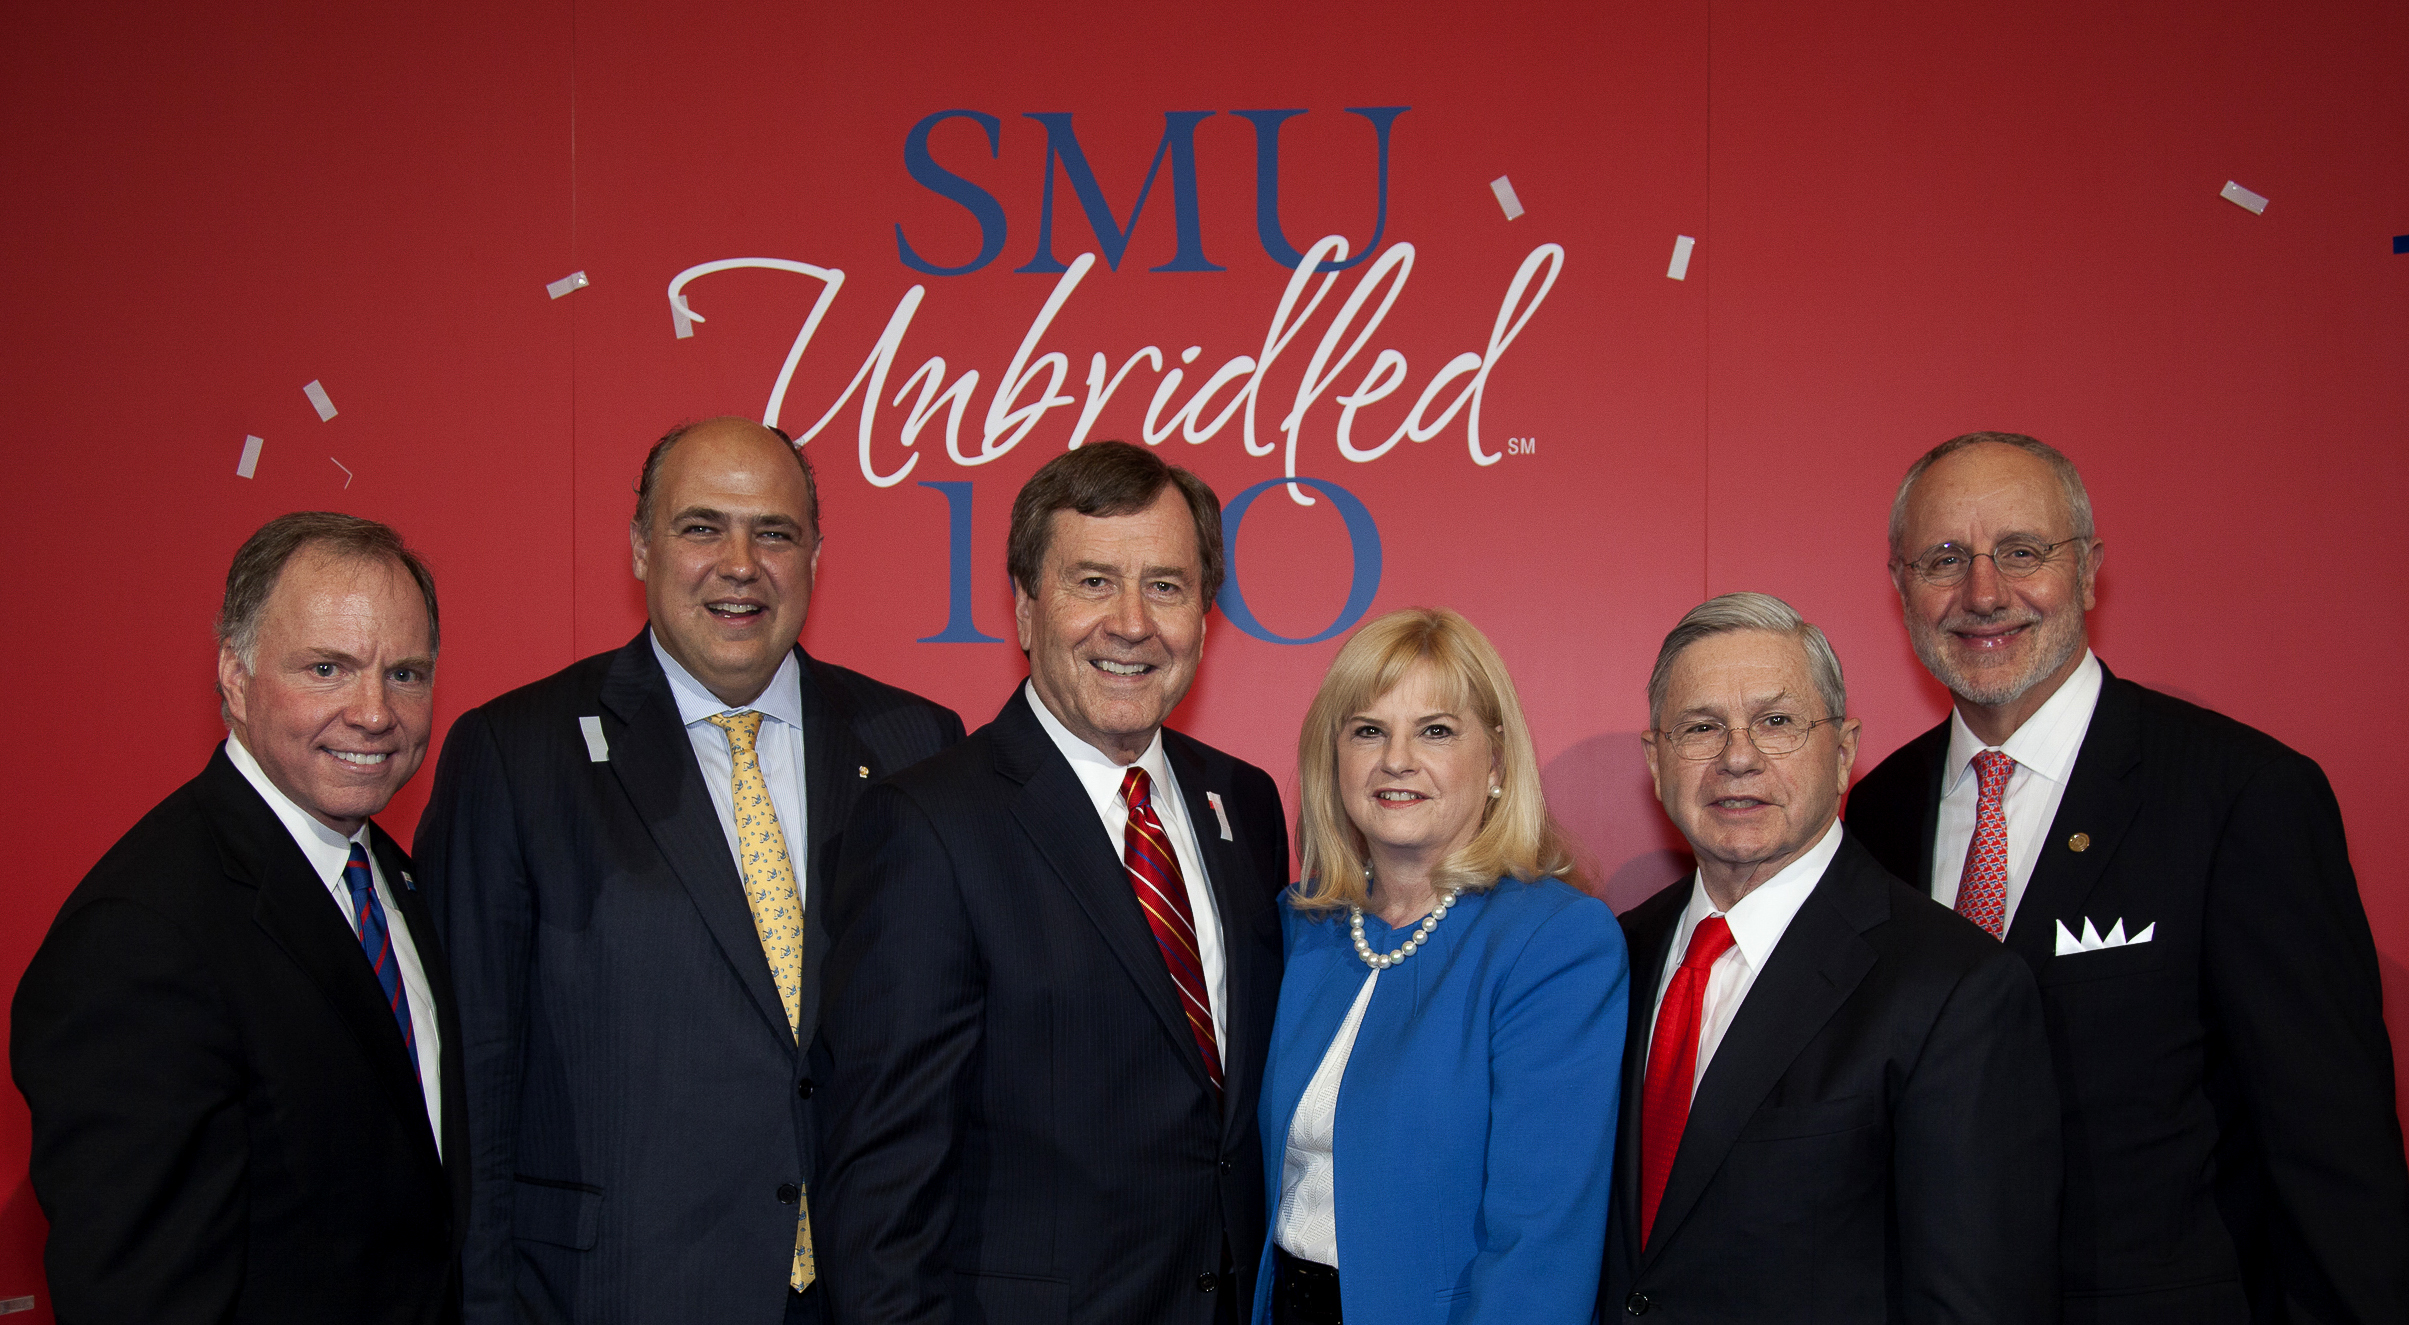 Brad E. Cheves, SMU vice president for Development and External Affairs; Mark A. Roglán, director of the Meadows Museum; SMU President R. Gerald Turner; Linda P. Evans, chairman and CEO of The Meadows Foundation; Michael M. Boone, chair of the SMU Board of Trustees; and Sam Holland, dean of the SMU Meadows School of the Arts.